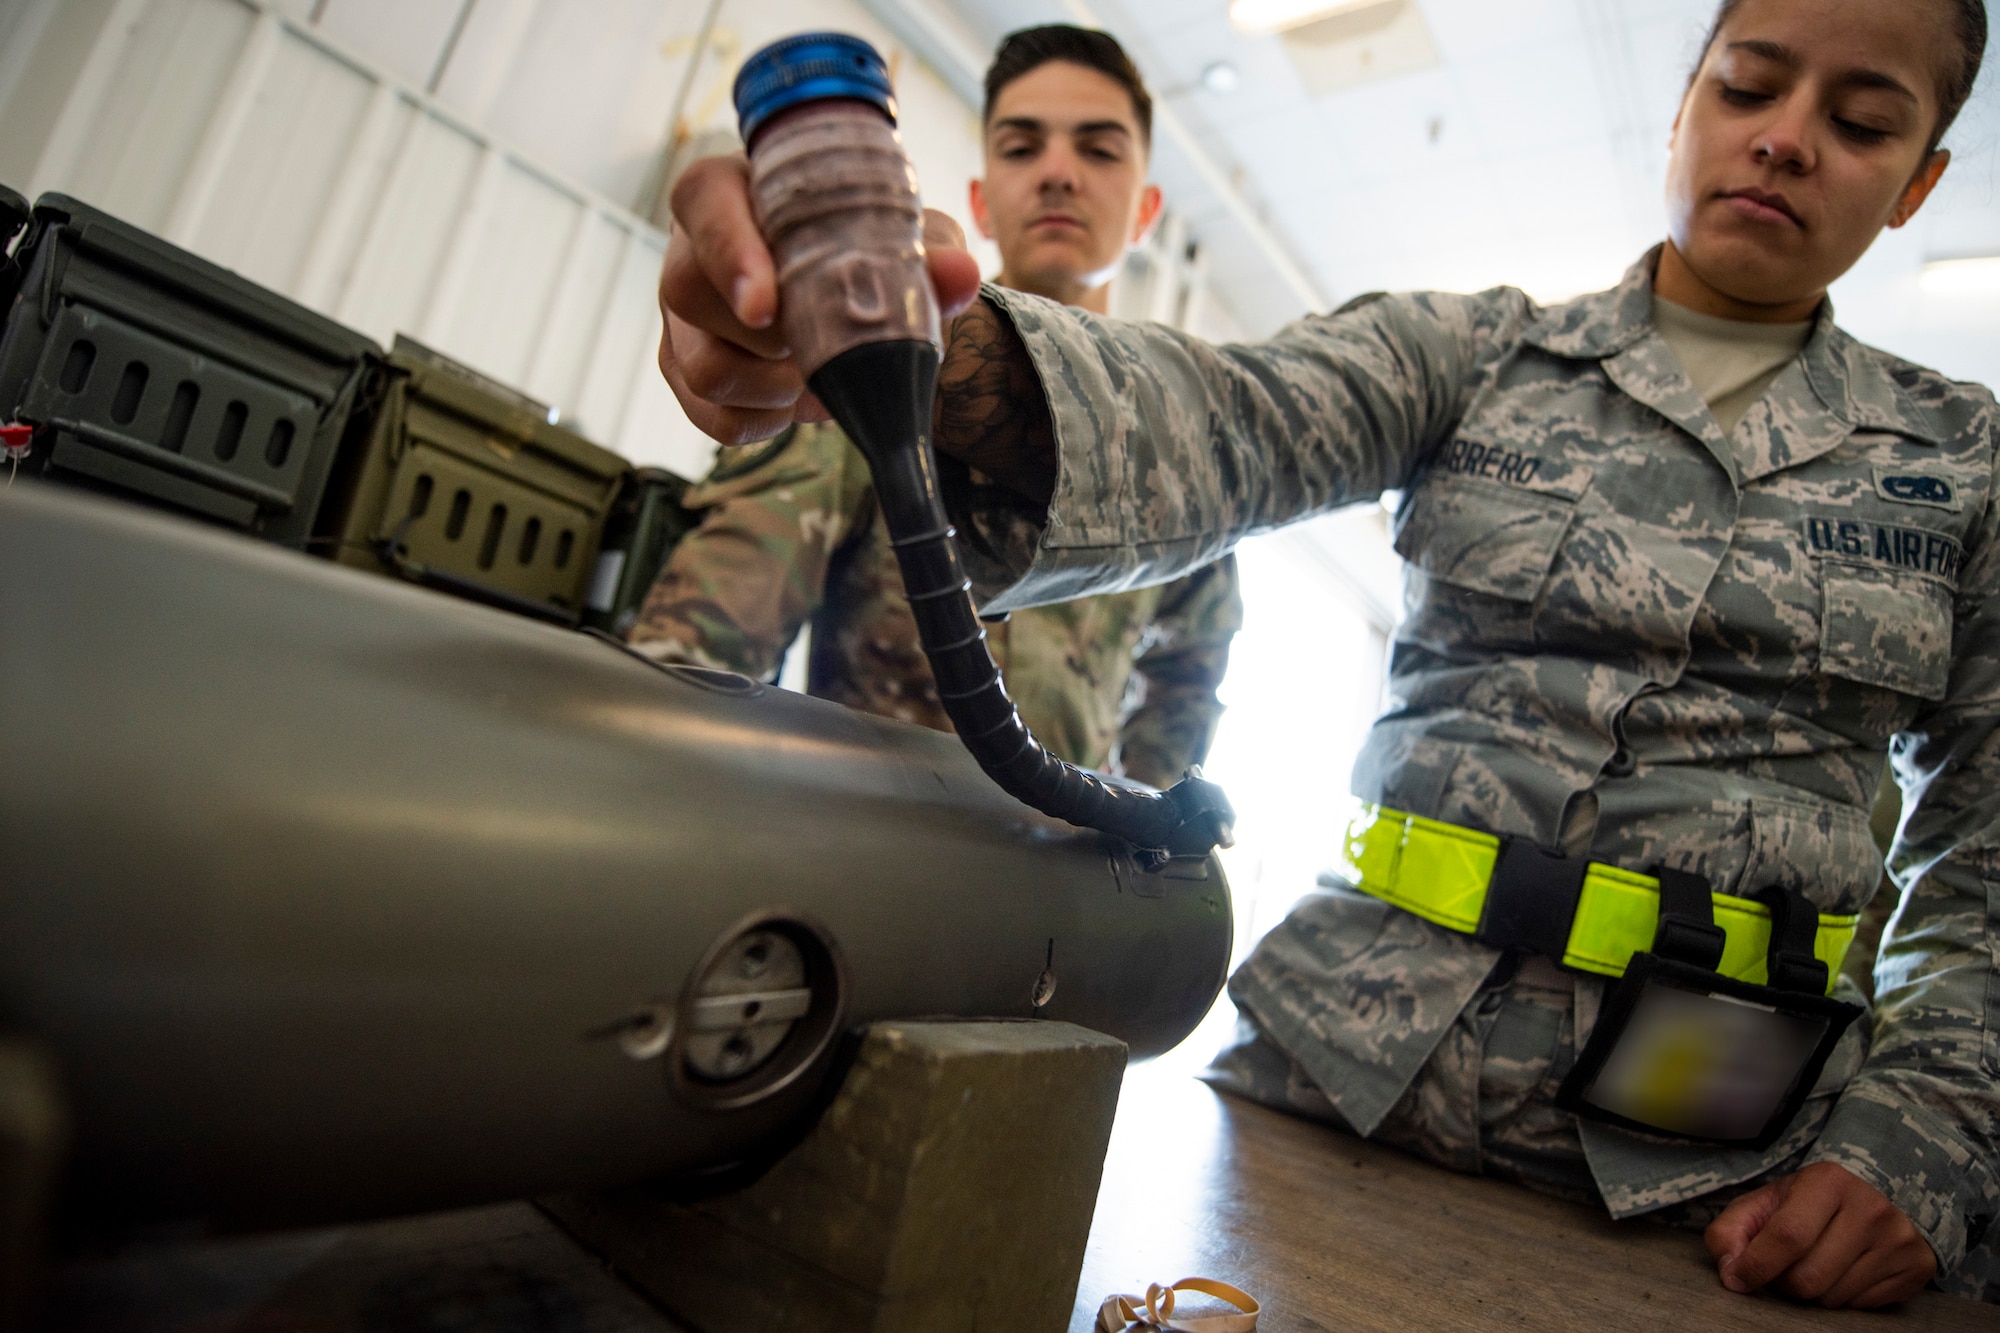 Senior Airman Alysia Carrero, right, 23d Maintenance Squadron munitions systems specialist crew chief, inspects a munition Oct. 17, 2019, at Moody Air Force Base, Ga. The Munitions Flight Production Division is responsible for maintaining, inspecting, producing and delivering ammo to Moody’s munitions holding area. Following technical orders for operations and procedures allow the Airmen to minimize errors in their stock of over 52 million munitions, ensuring the fighter squadrons are prepared for future operations. (U.S. Air Force photo by Airman Elijah M. Dority)